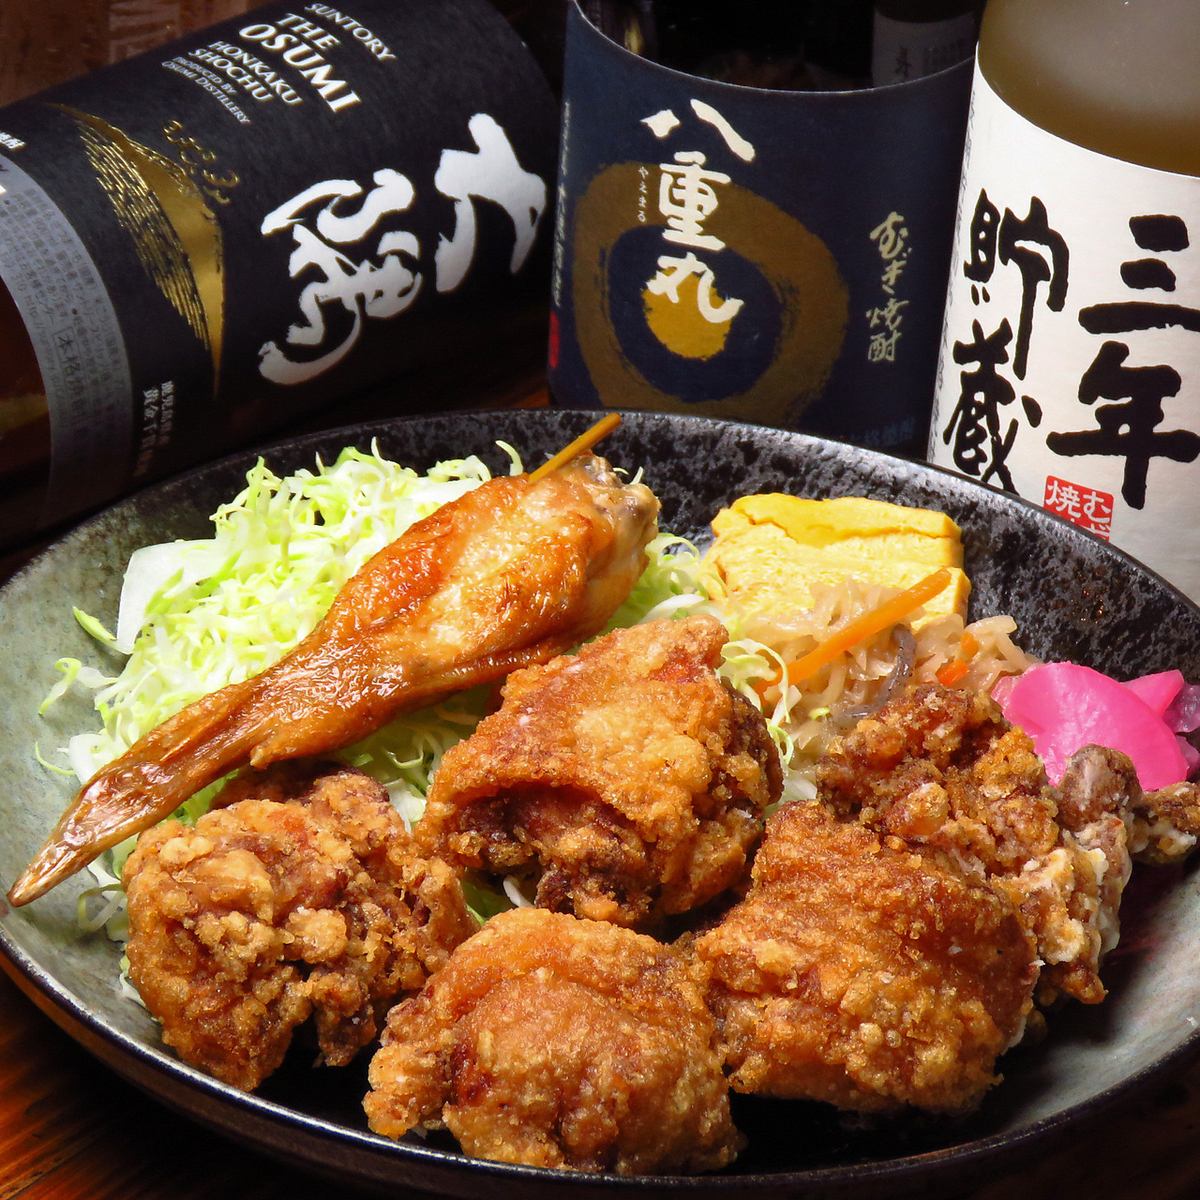 You can enjoy a wide variety of fried chicken creative dishes and sake from a fried chicken specialty store!